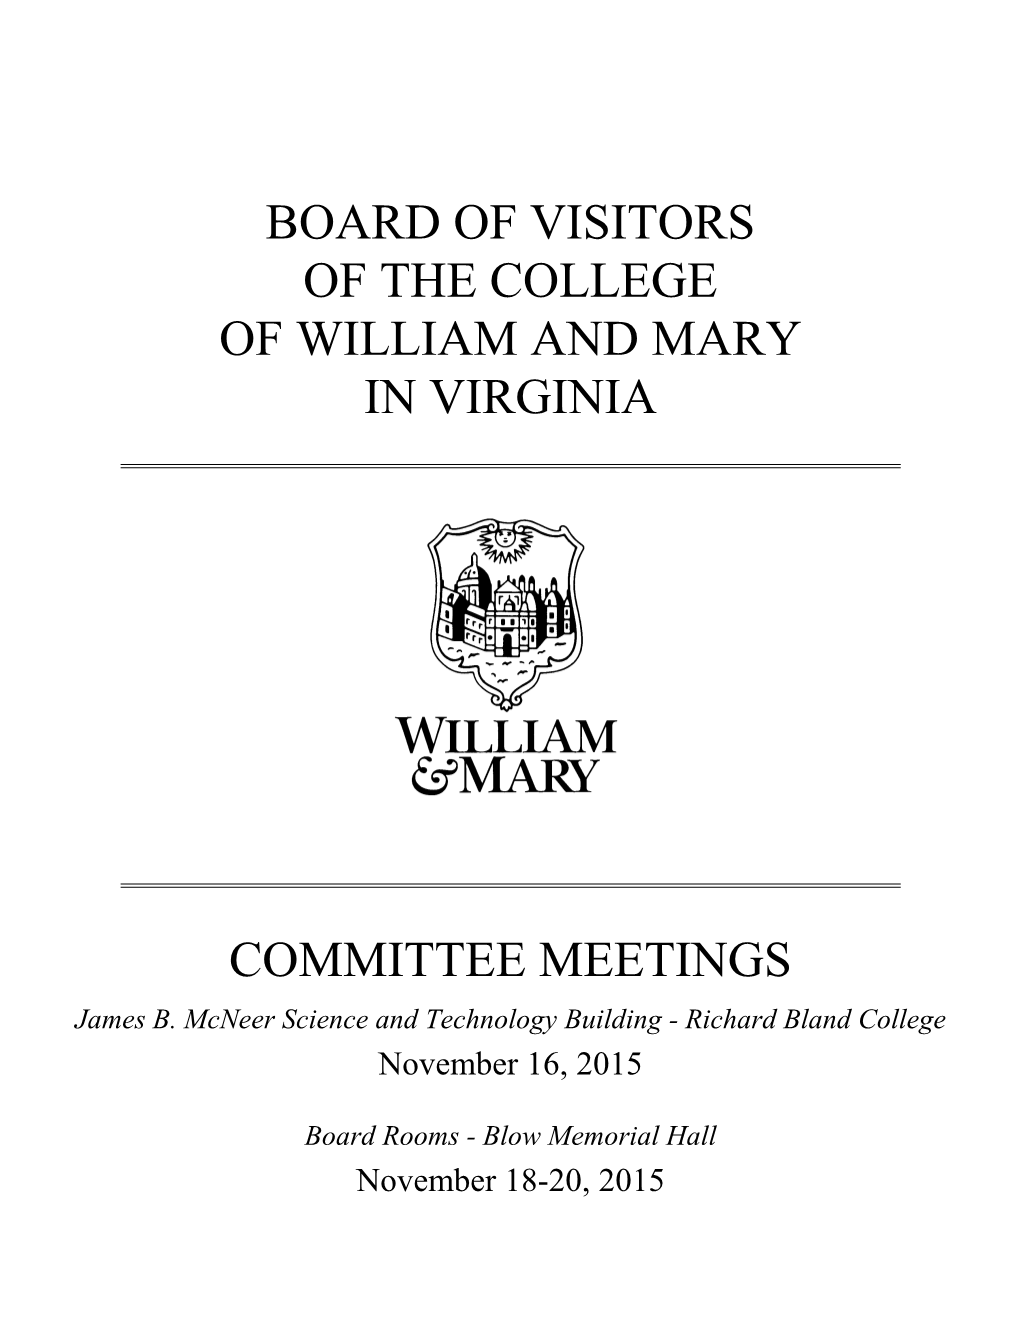 Board of Visitors of the College of William and Mary in Virginia